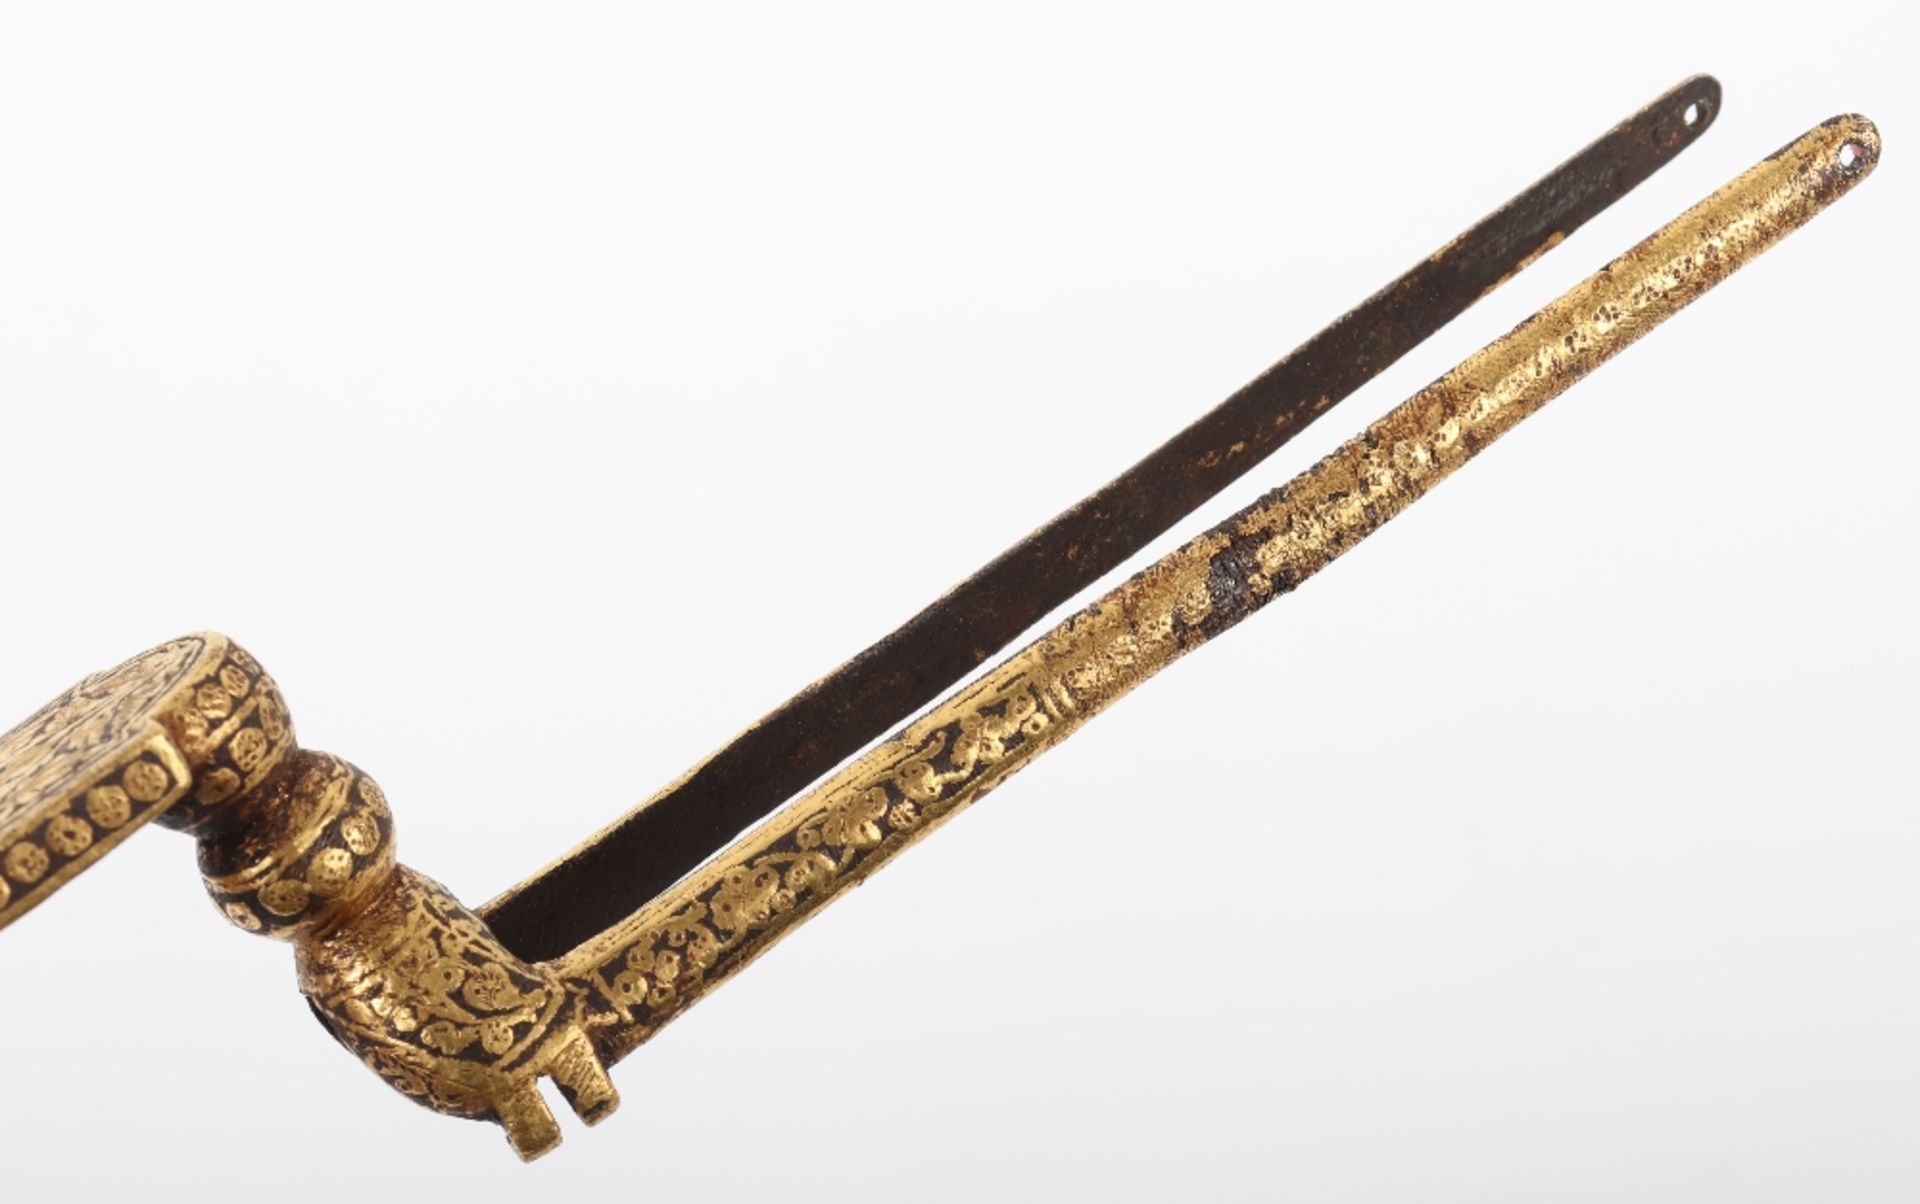 Rare Indian Bayonet Sangin Intended to be Bound to a Matchlock Gun Torador, 18th or 19th Century - Image 7 of 16